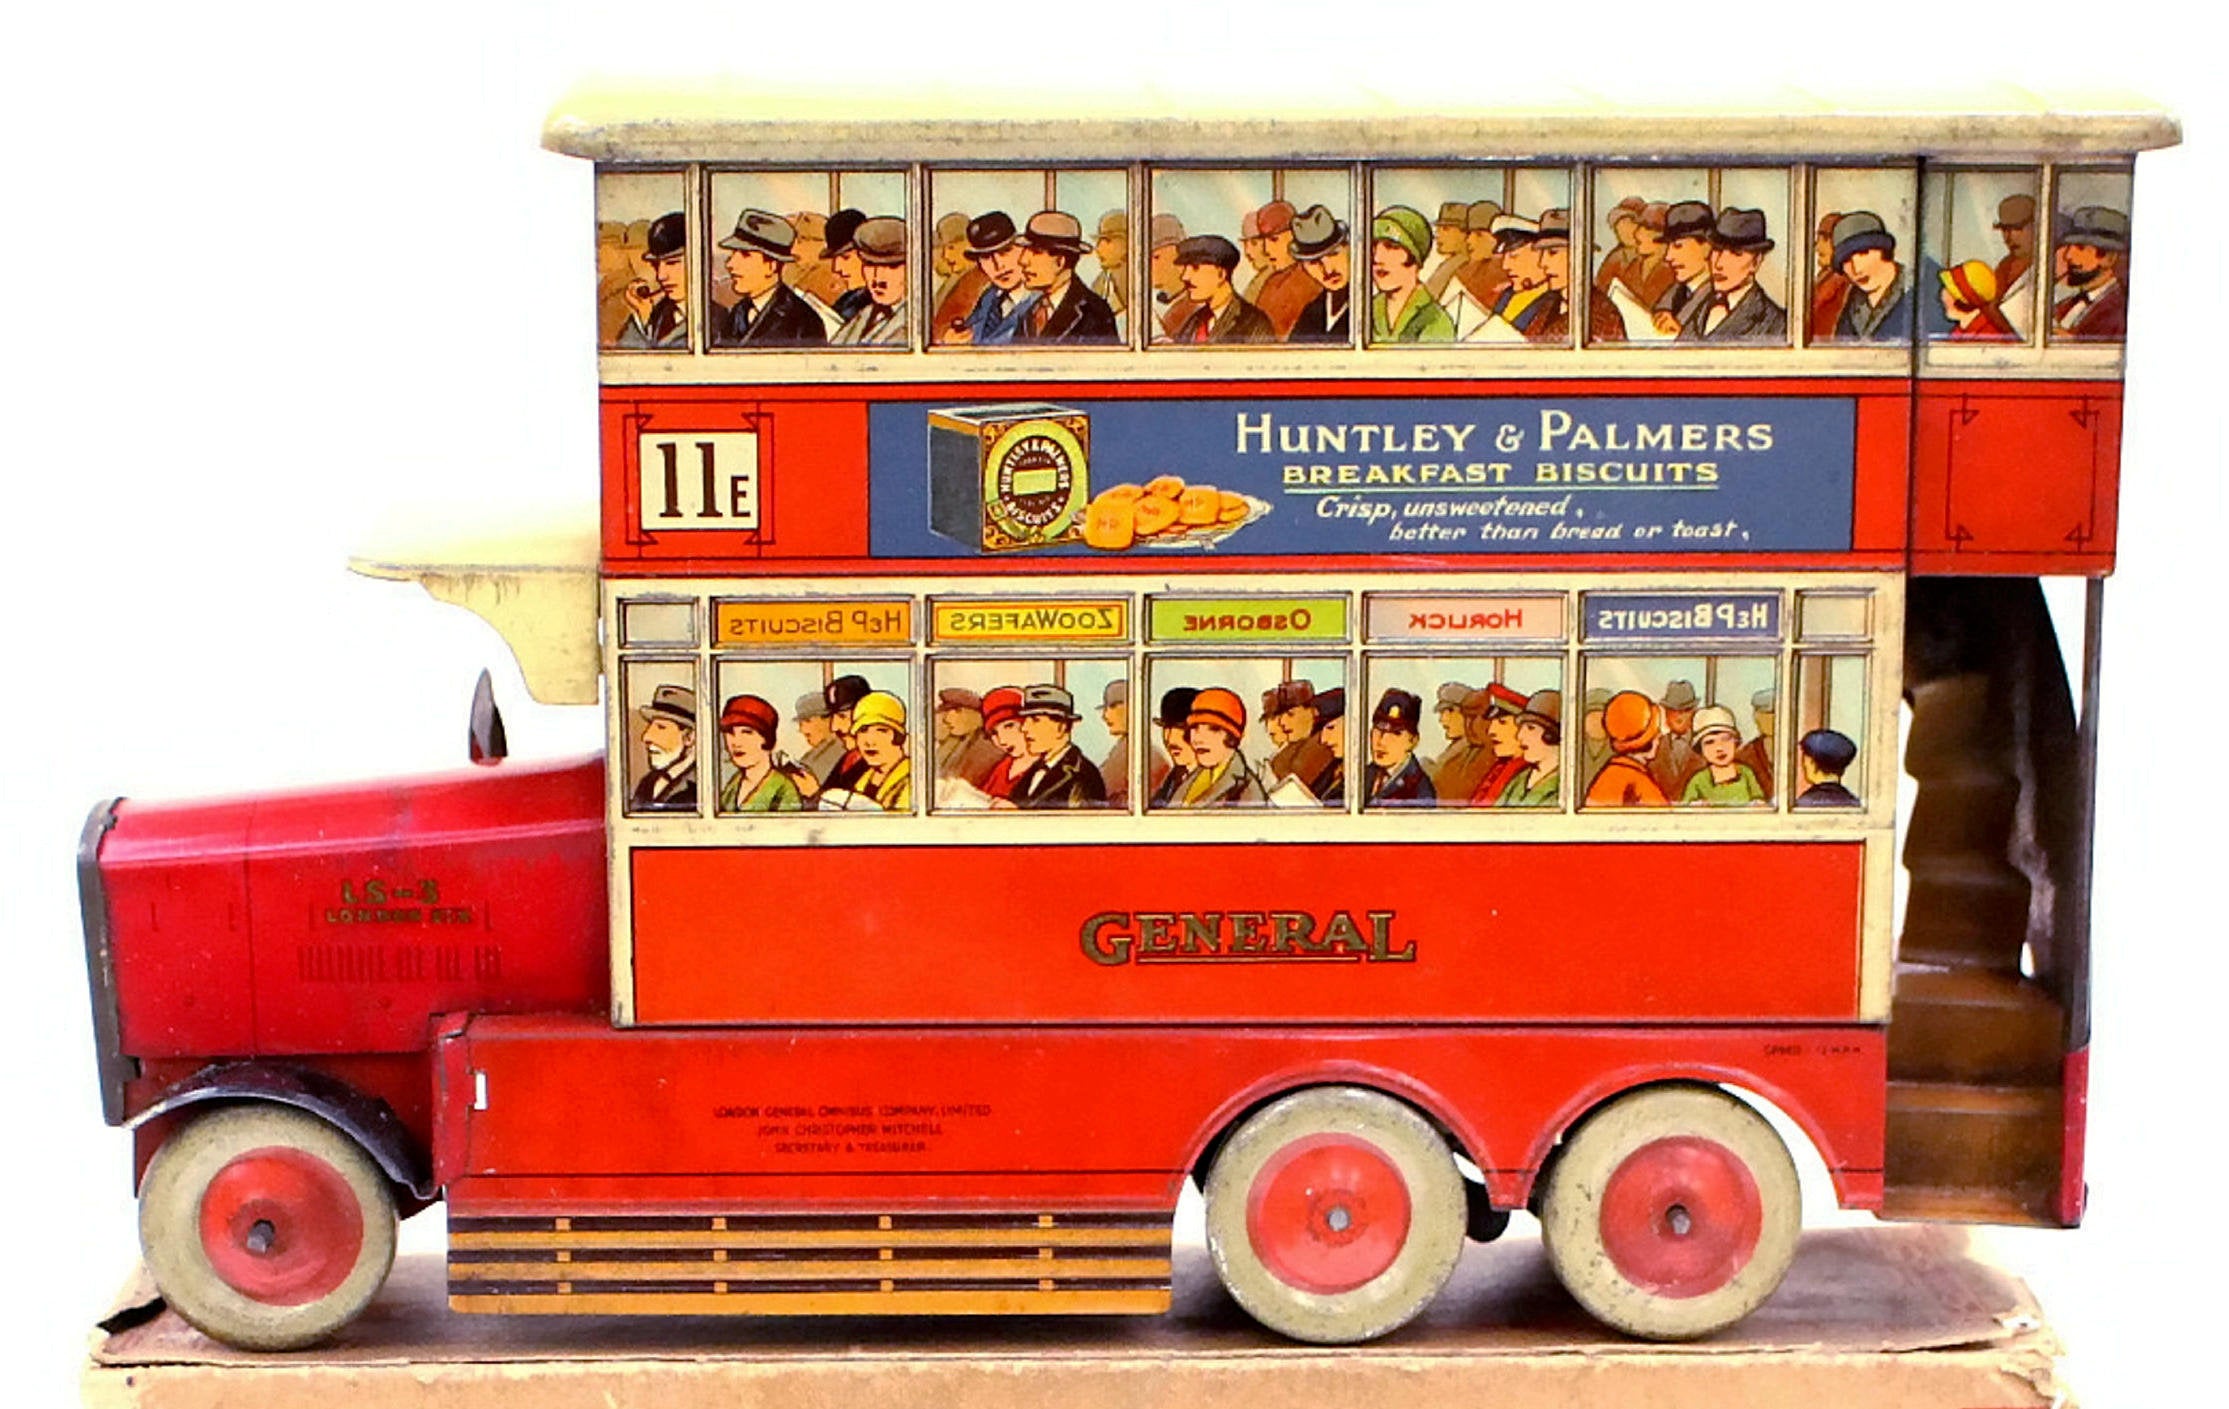 The biscuit tin depicts a red London bus on its way to Liverpool Street